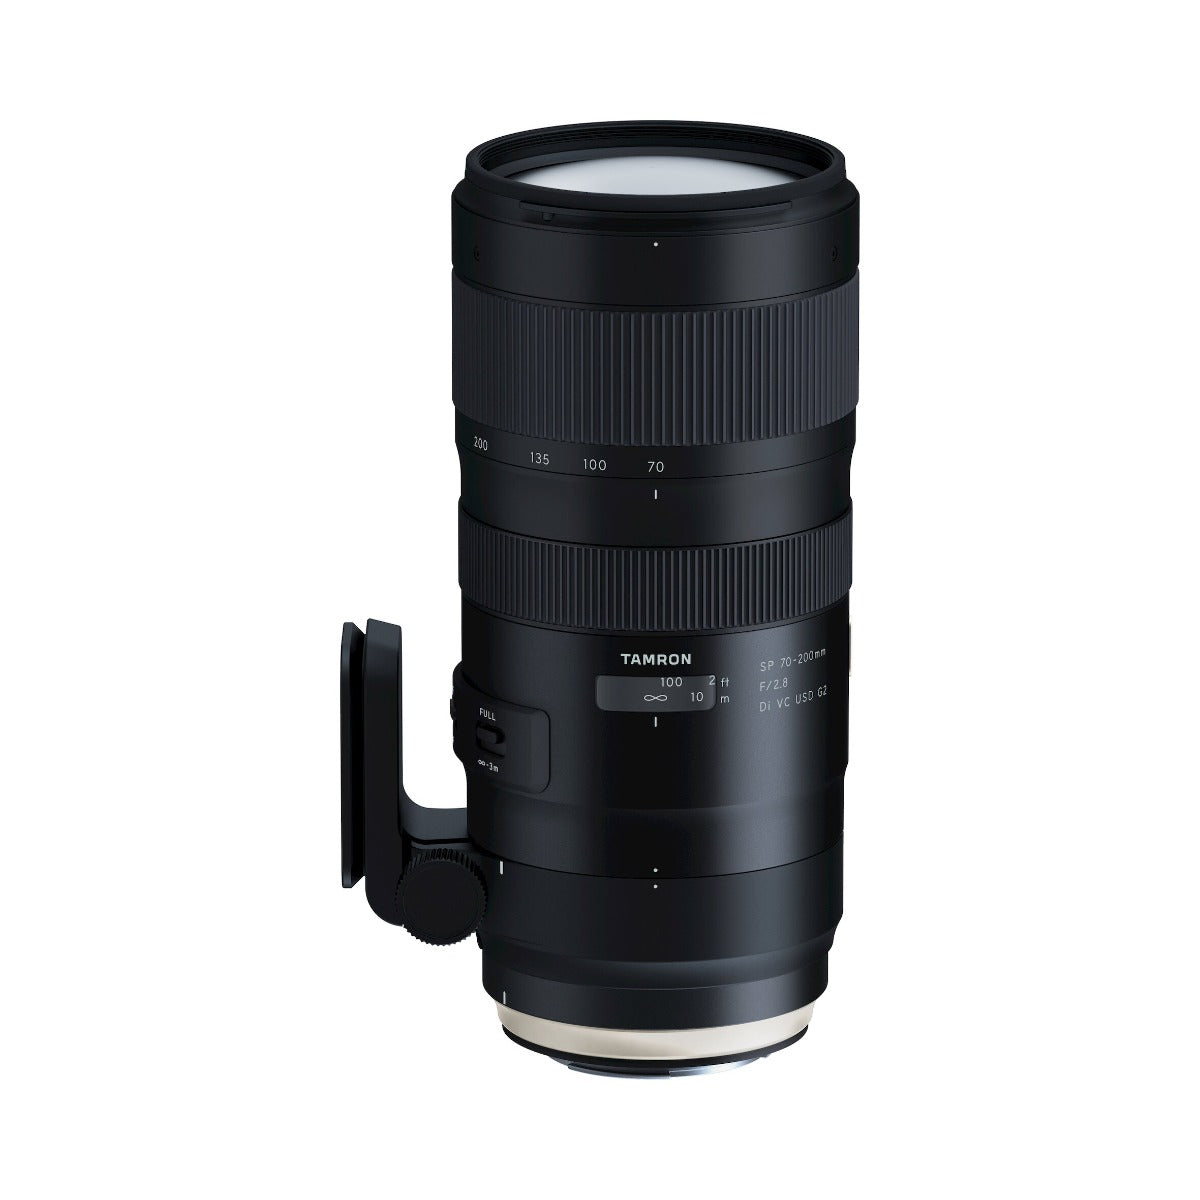 Product Image of Tamron SP 70-200mm f2.8 Di VC USD G2 - Nikon Fit Lens